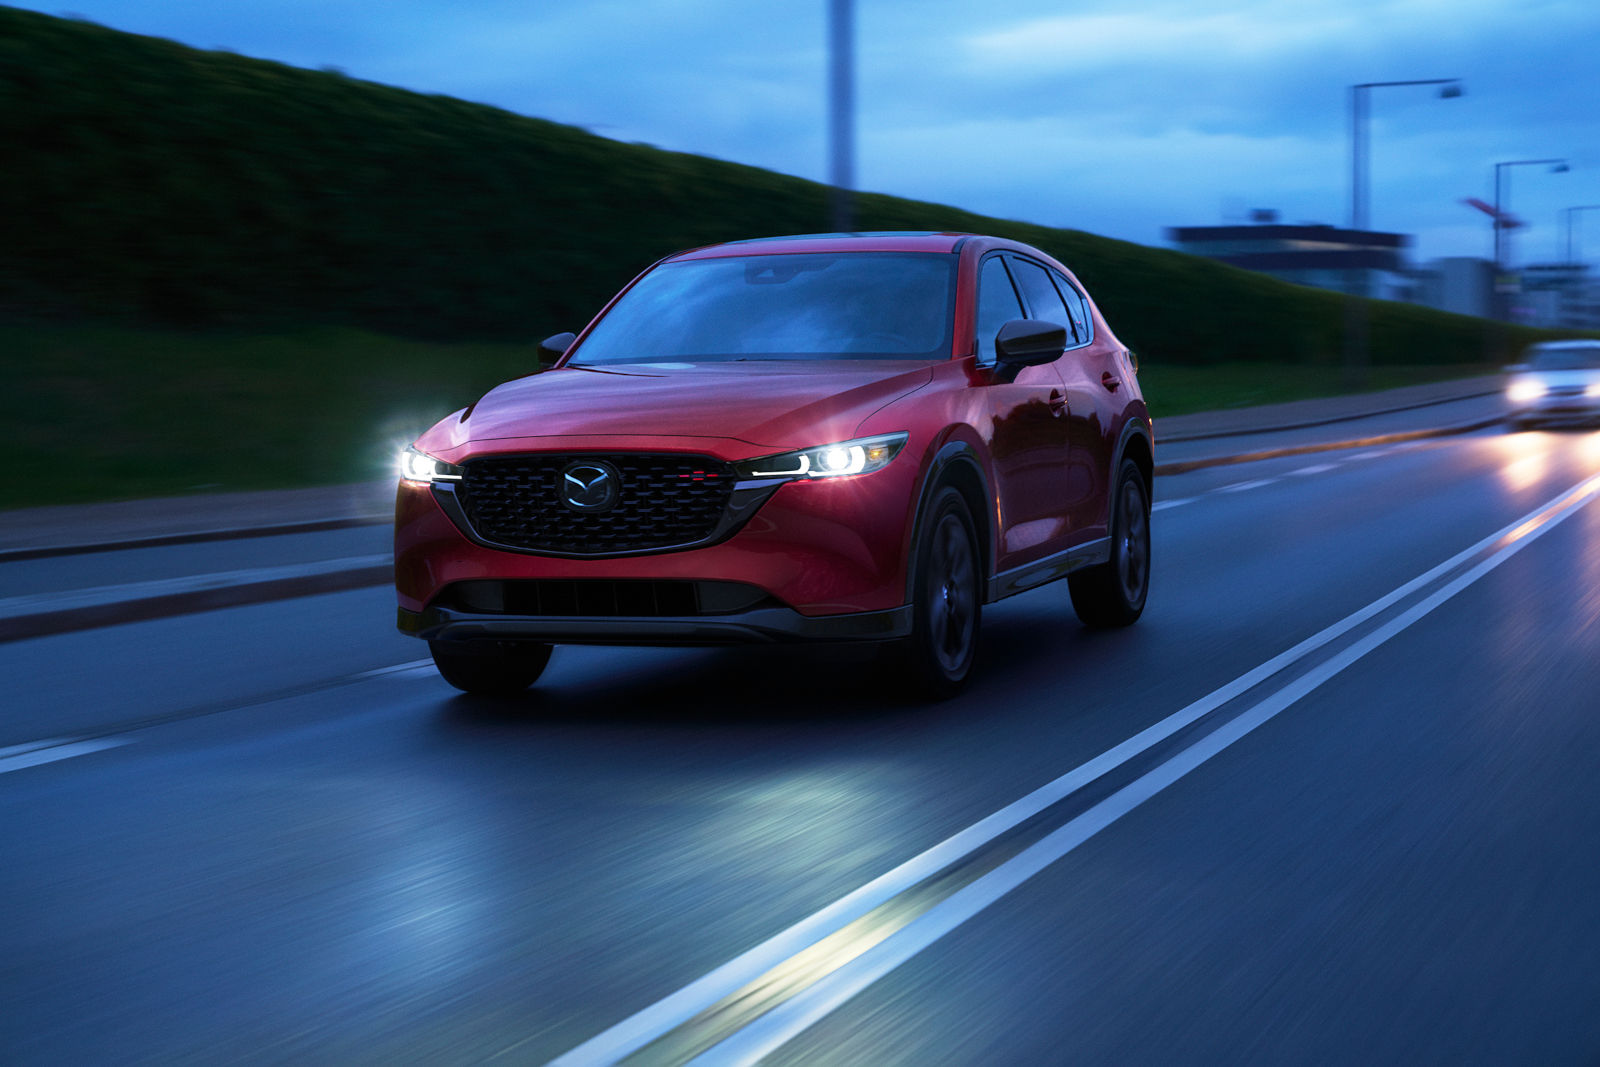 How You Can Improve the Fuel Economy of Your Mazda this Winter